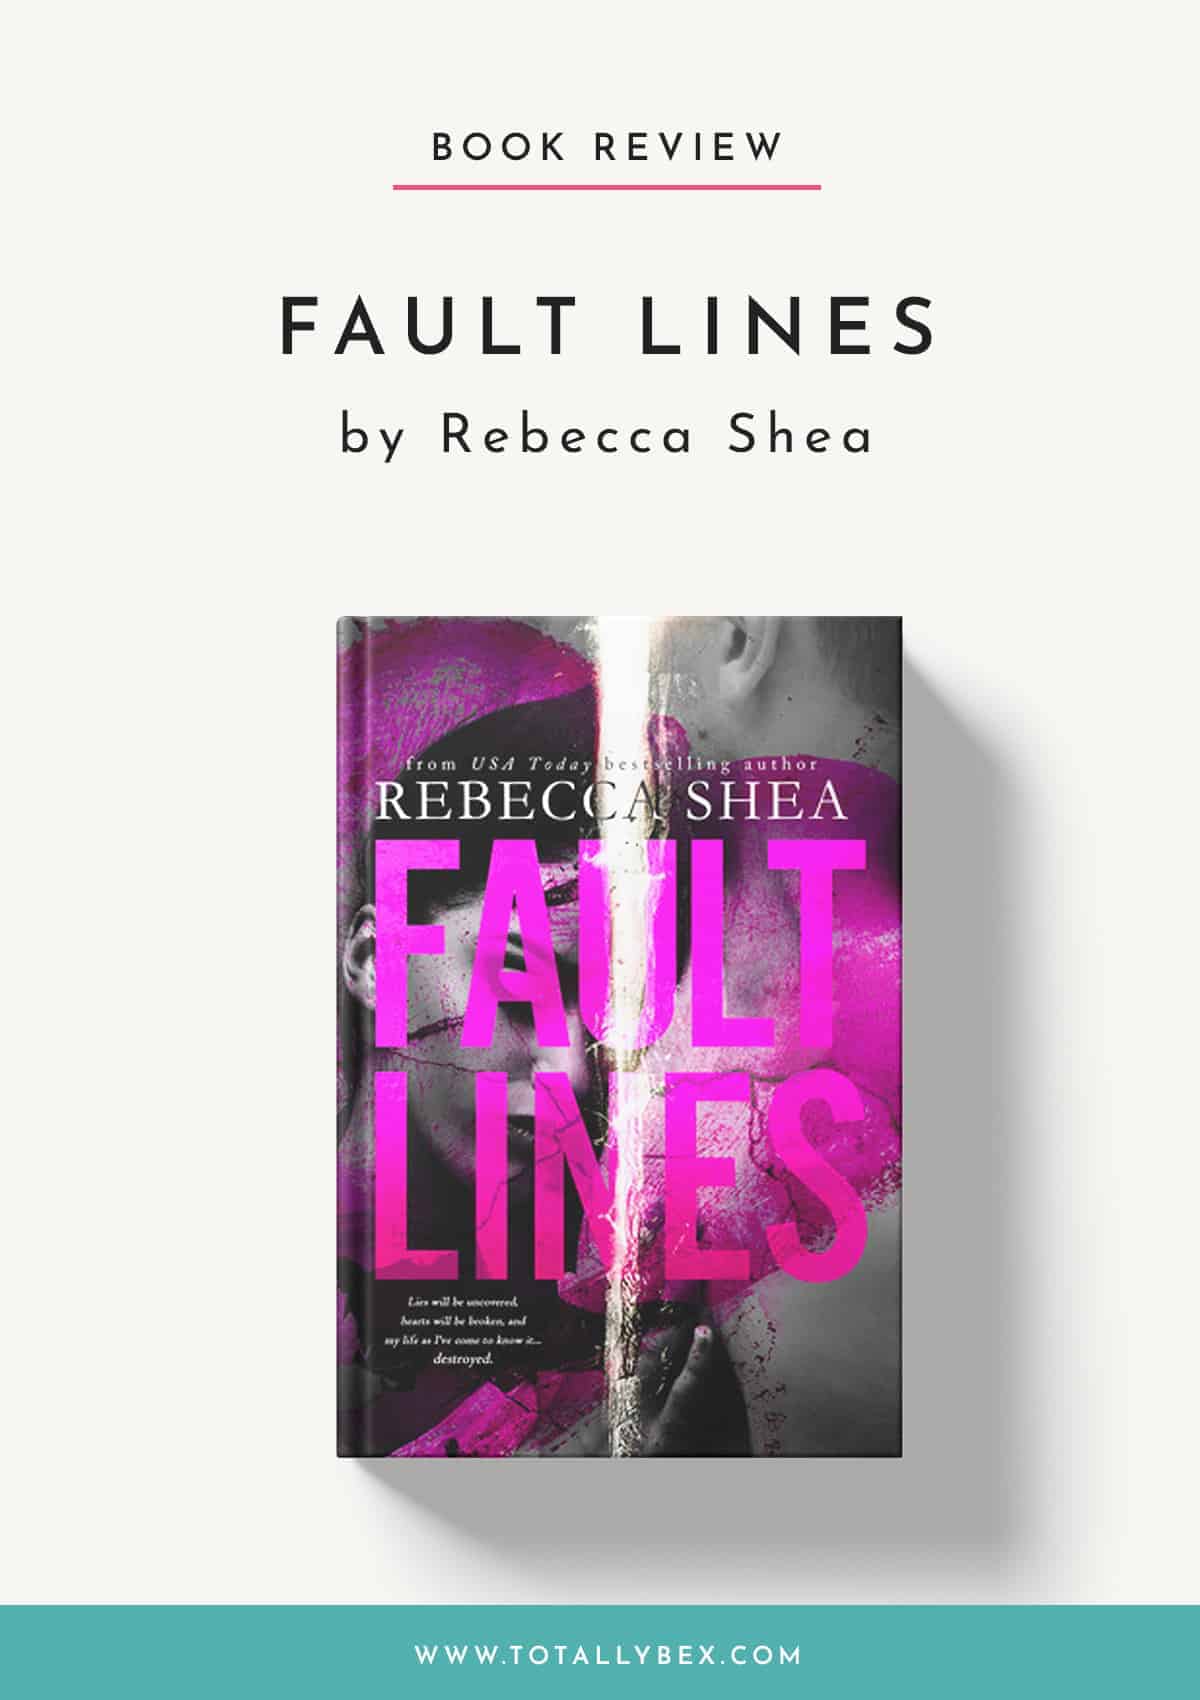 Fault Lines by Rebecca Shea-Book Review